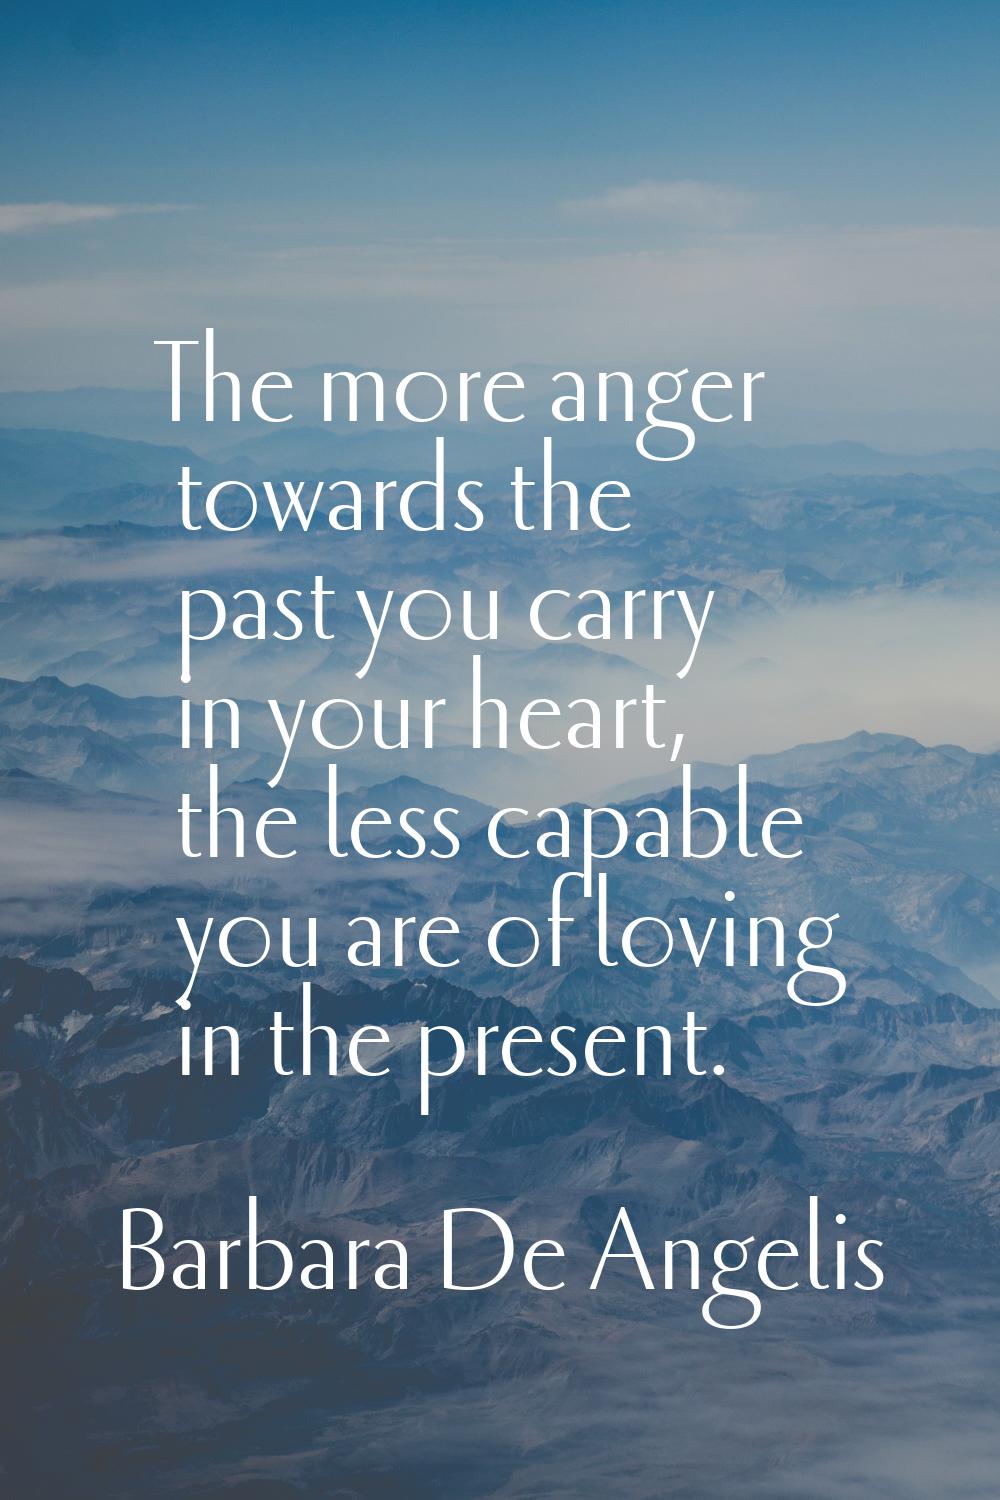 The more anger towards the past you carry in your heart, the less capable you are of loving in the 